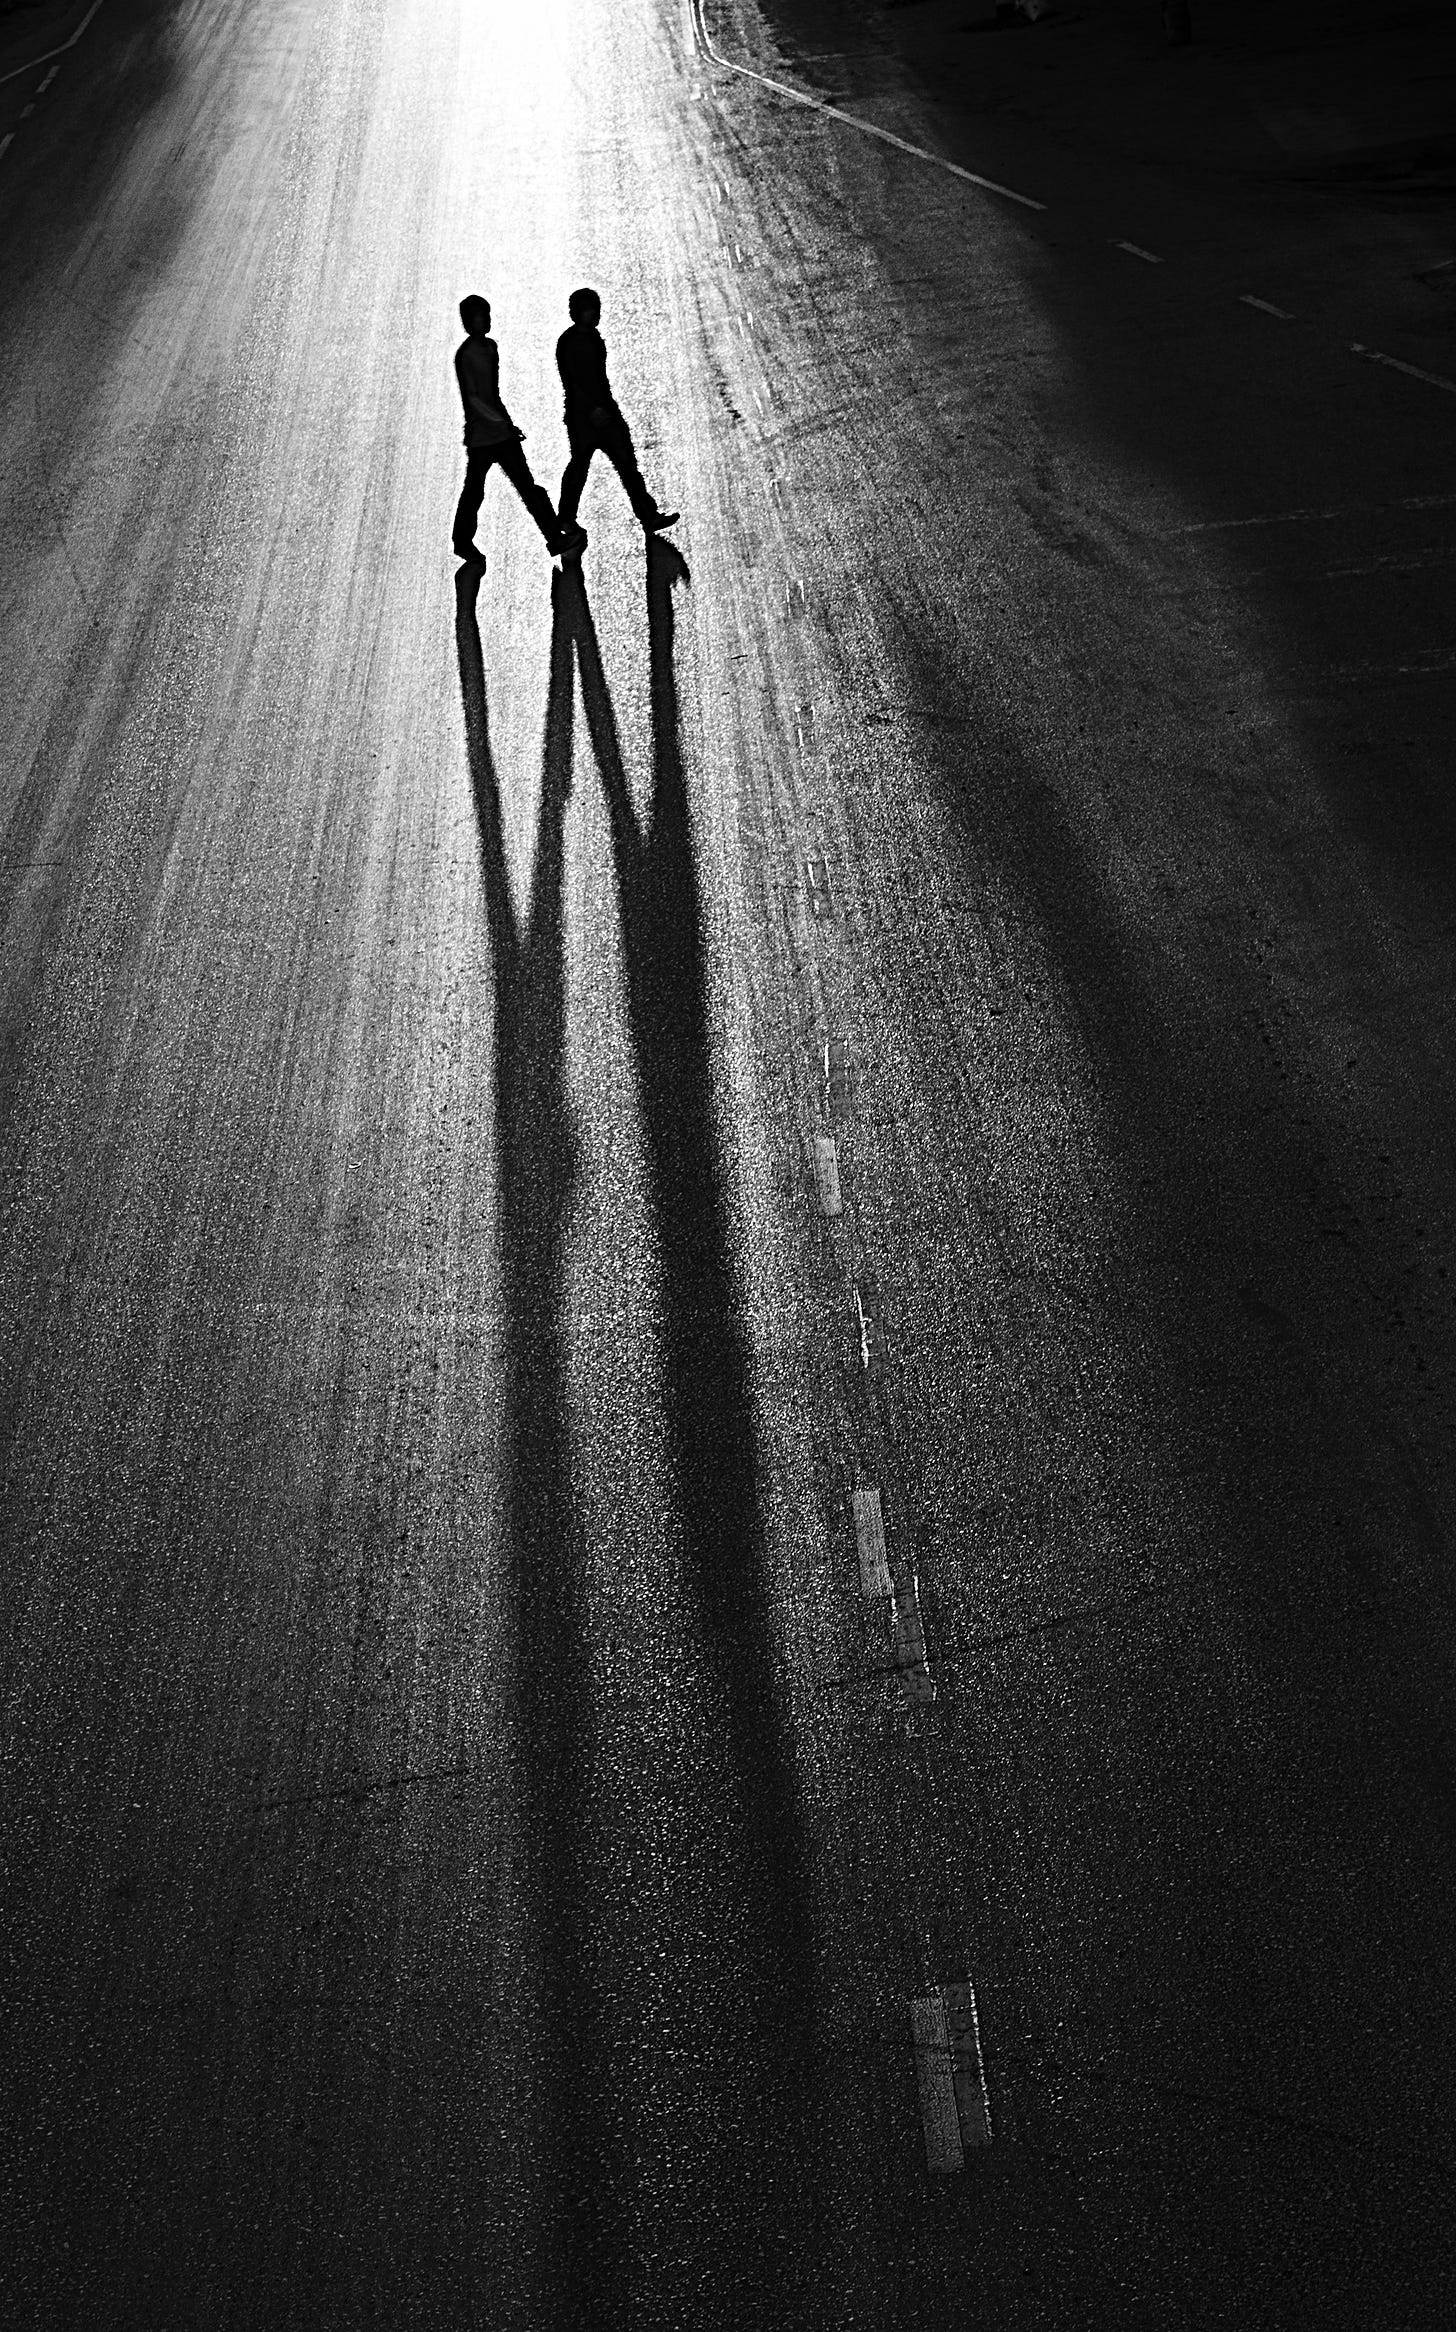 Long shadows cast by two  people crossing a street in the dark